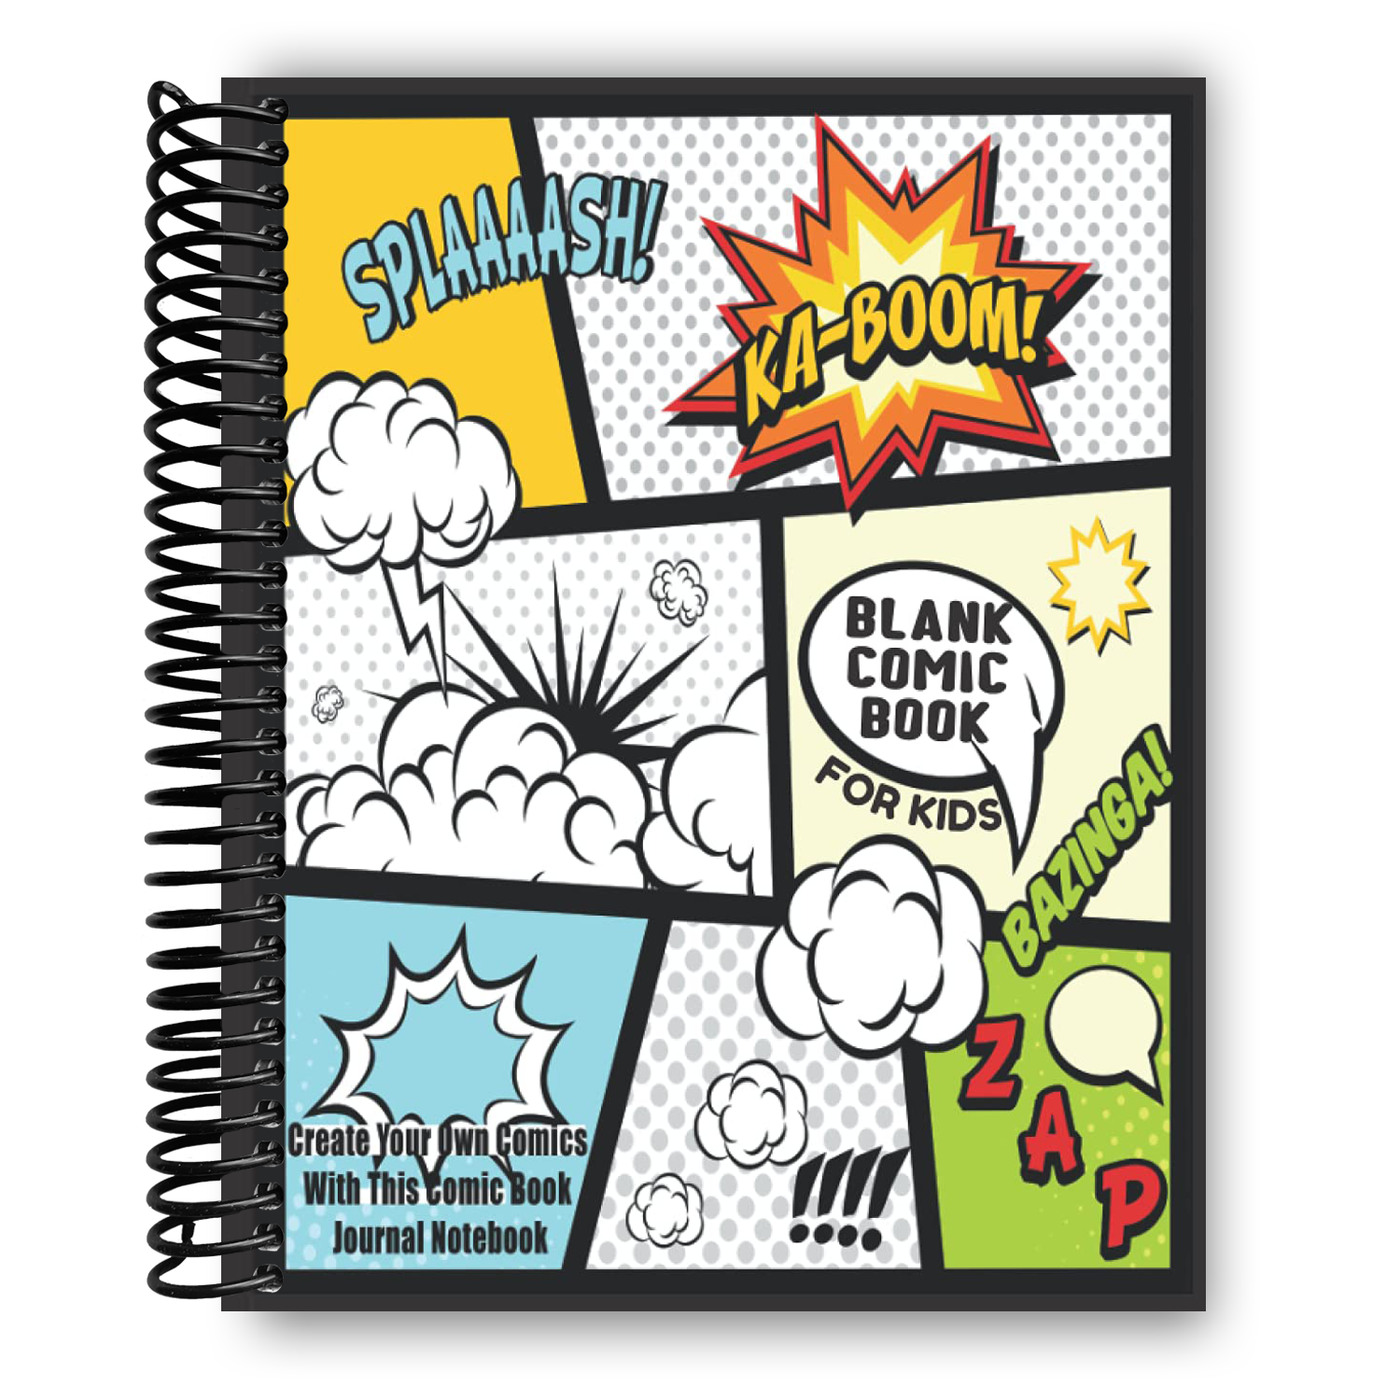 Blank Comic Book For Kids : Create Your Own Comics With This Comic Book Journal Notebook: Over 100 Pages Large Big 8.5" x 11" Cartoon / Comic Book With Lots of Templates (Blank Comic Books) (Spiral bound)